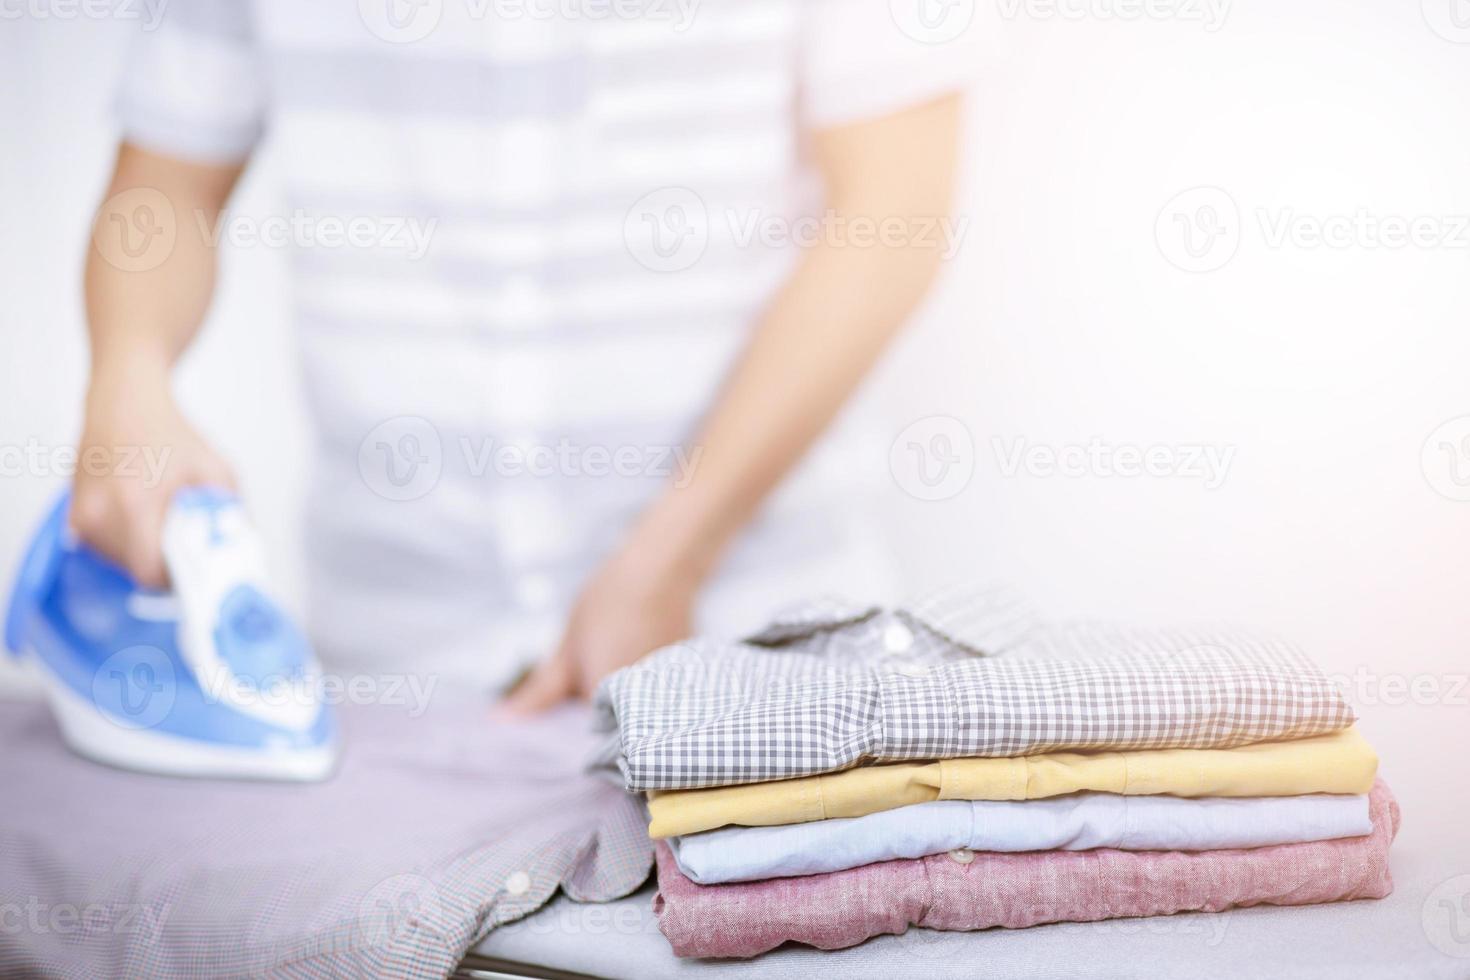 Man at home electric ironing and pile clothes variety of colors. Men ironing shirt on ironing board with steaming blue iron. housework and household concept. photo